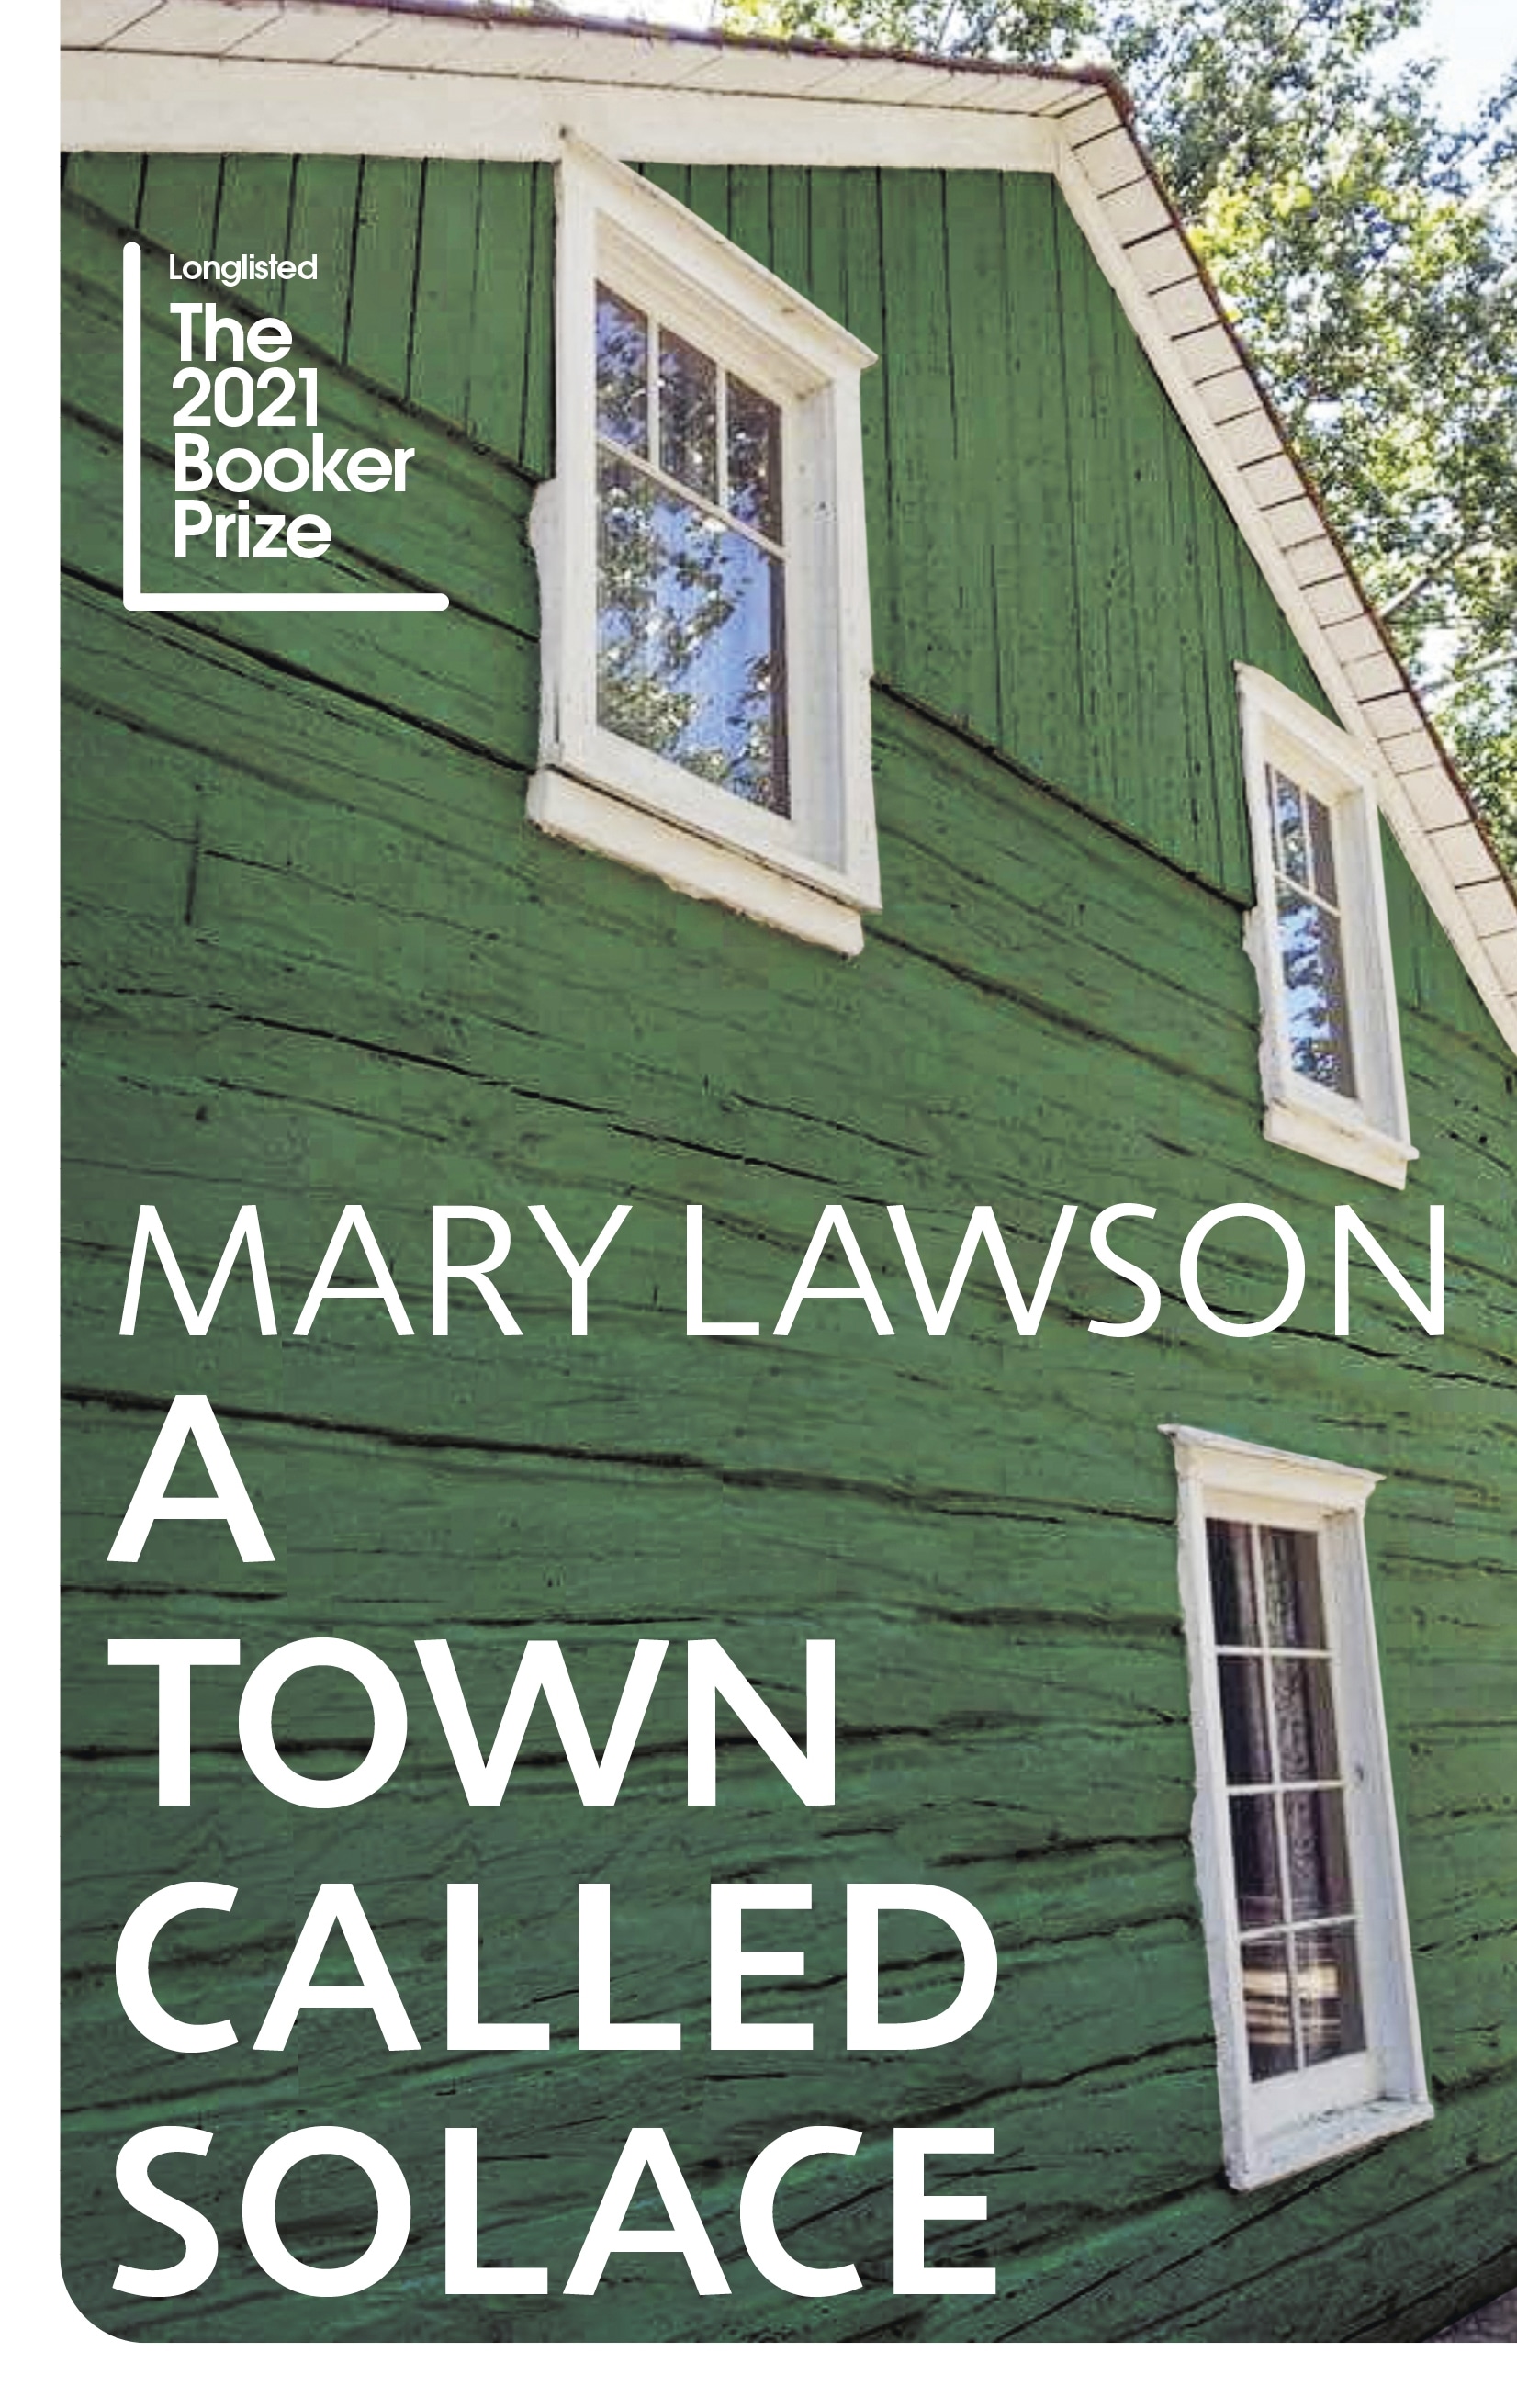 Book “A Town Called Solace” by Mary Lawson — February 18, 2021